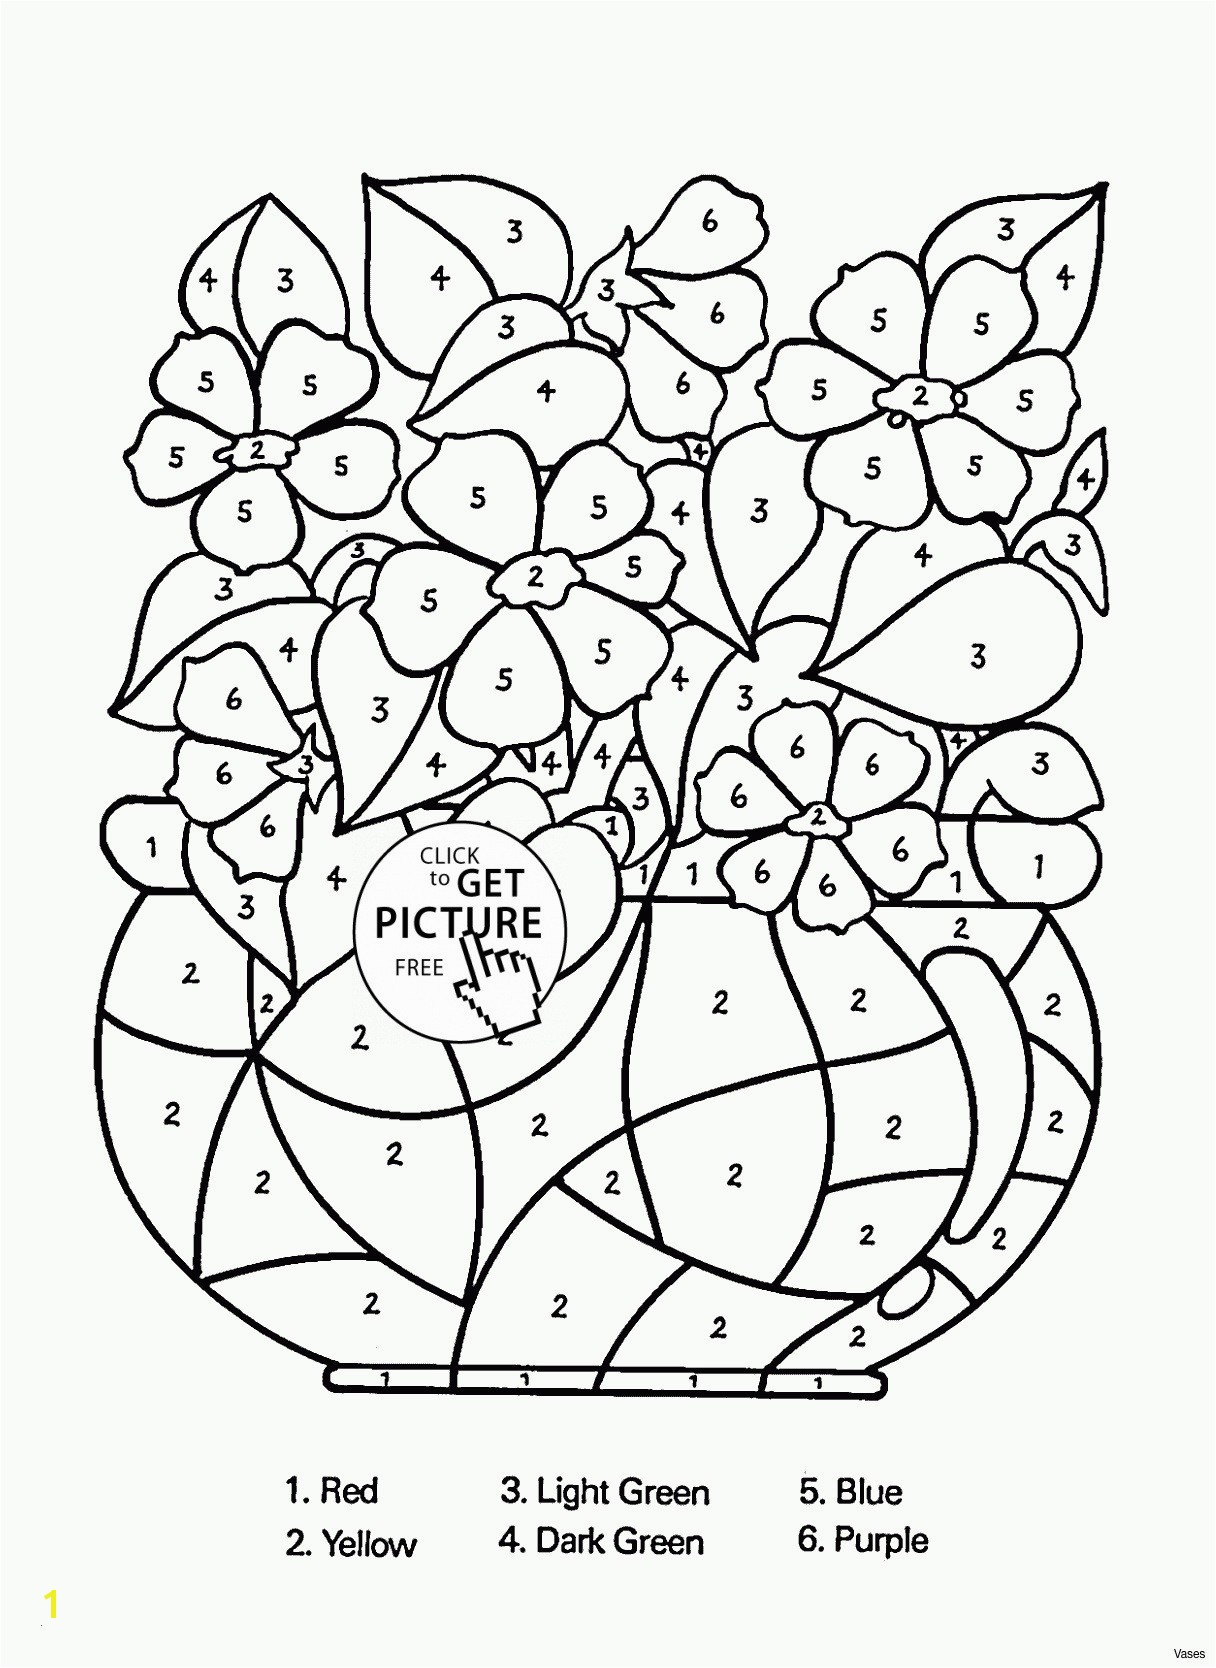 Meadowlark Coloring Page Bird Coloring Pages for Kids Best Bird Coloring Pages for Kids